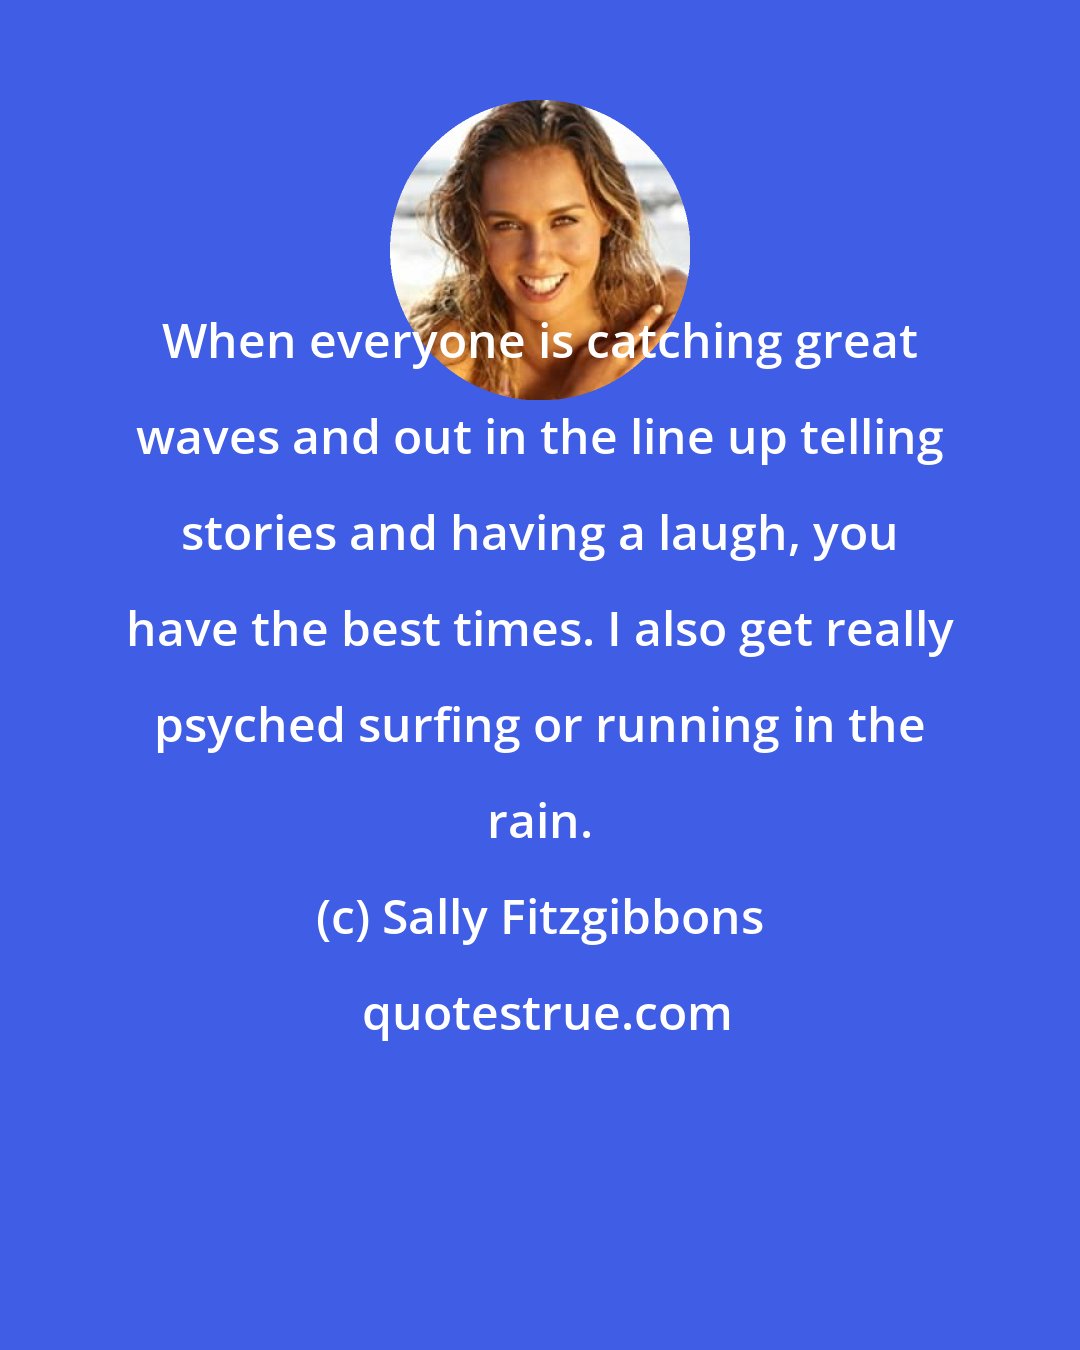 Sally Fitzgibbons: When everyone is catching great waves and out in the line up telling stories and having a laugh, you have the best times. I also get really psyched surfing or running in the rain.